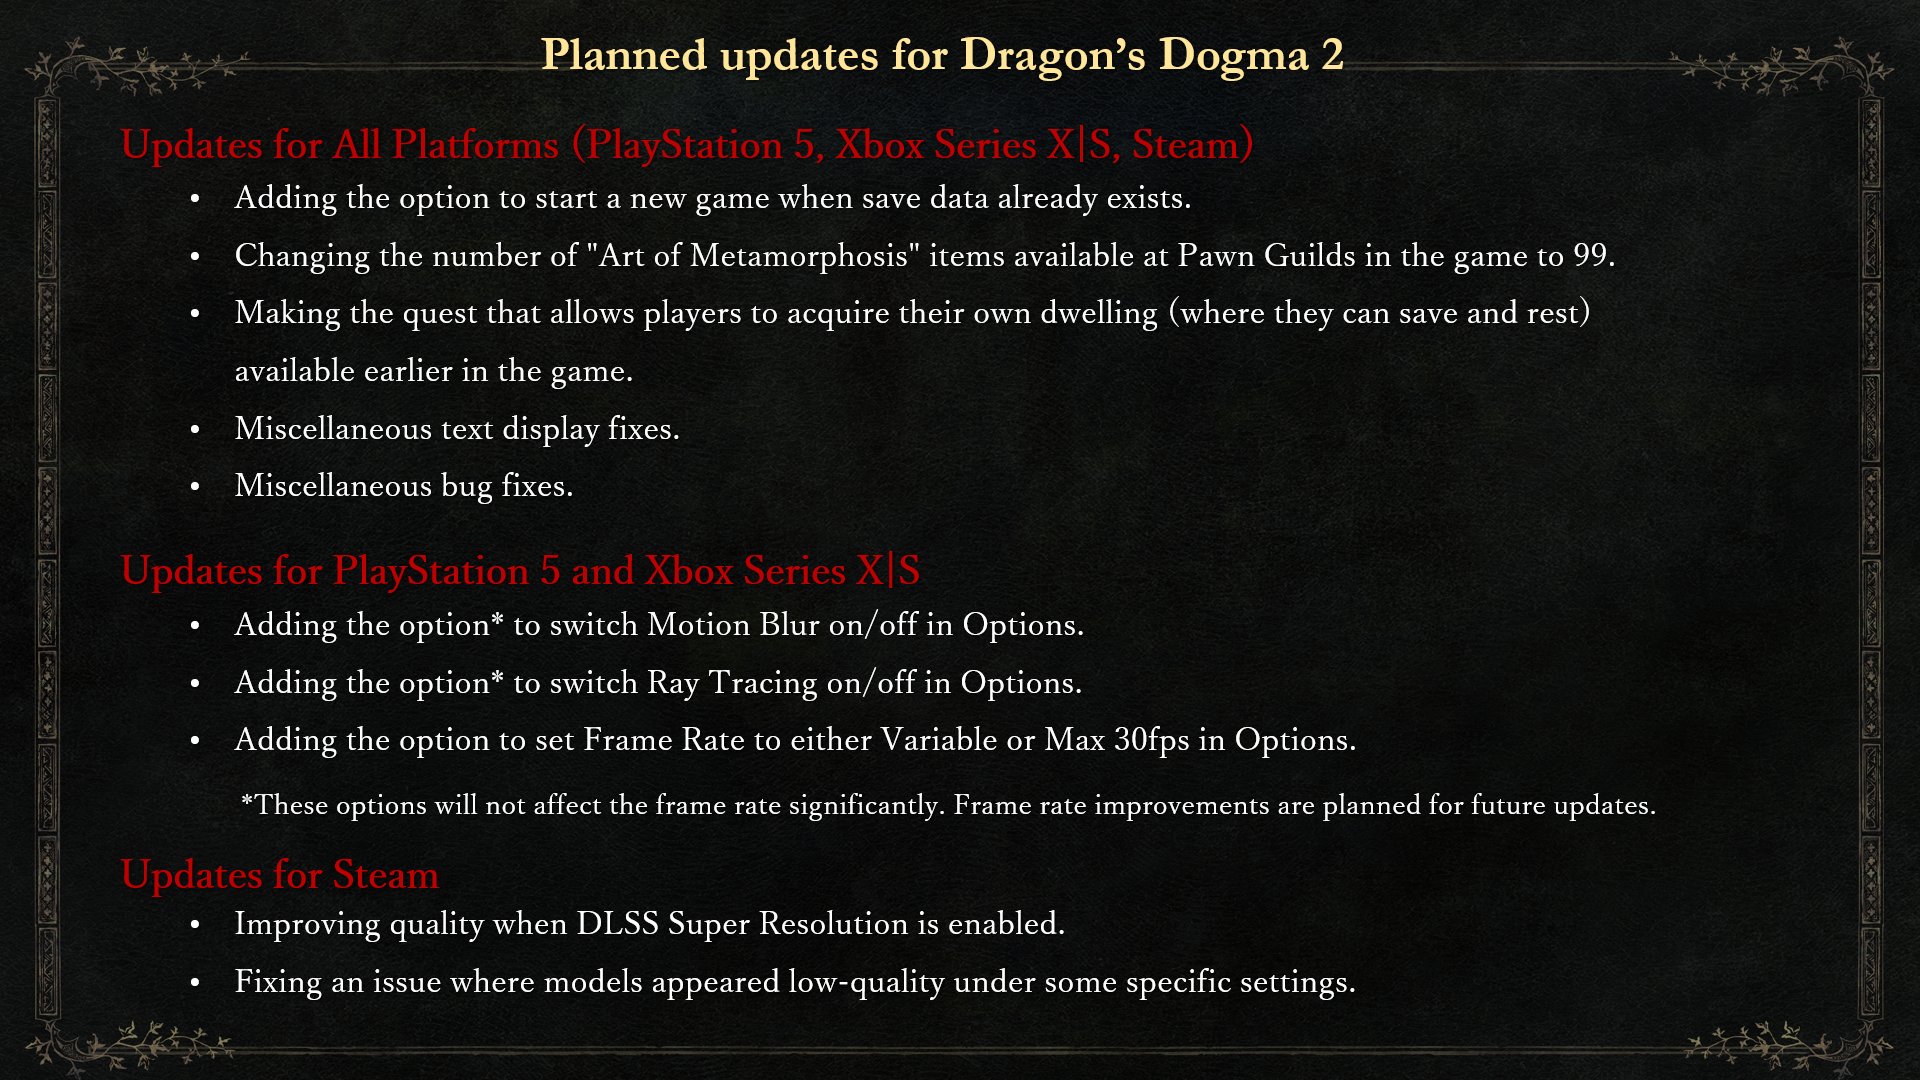 Planned Updates for Dragon's Dogma 2